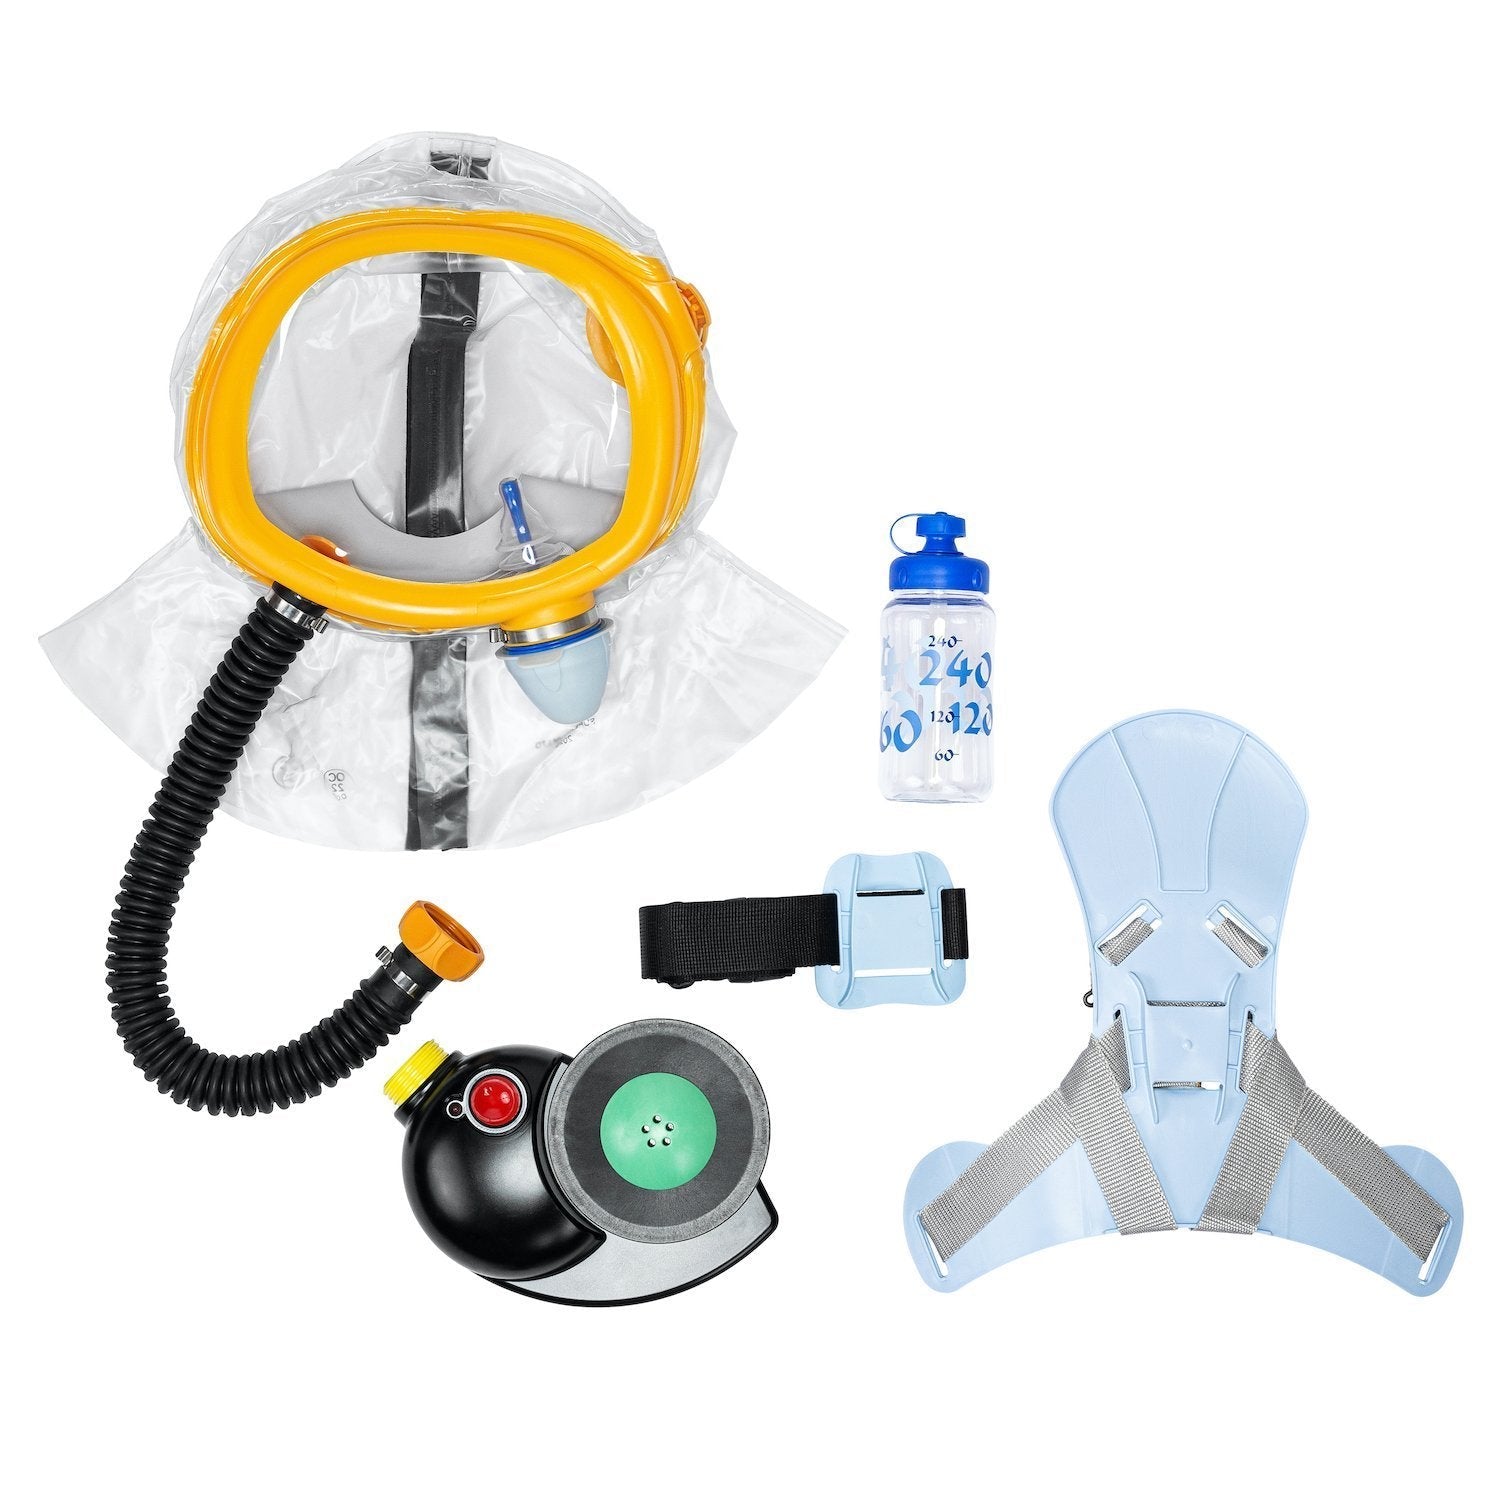 MIRA Safety CM-3M CBRN Child Escape Respirator / Infant Gas Mask with PAPR Protective Gear MIRA Safety Tactical Gear Supplier Tactical Distributors Australia